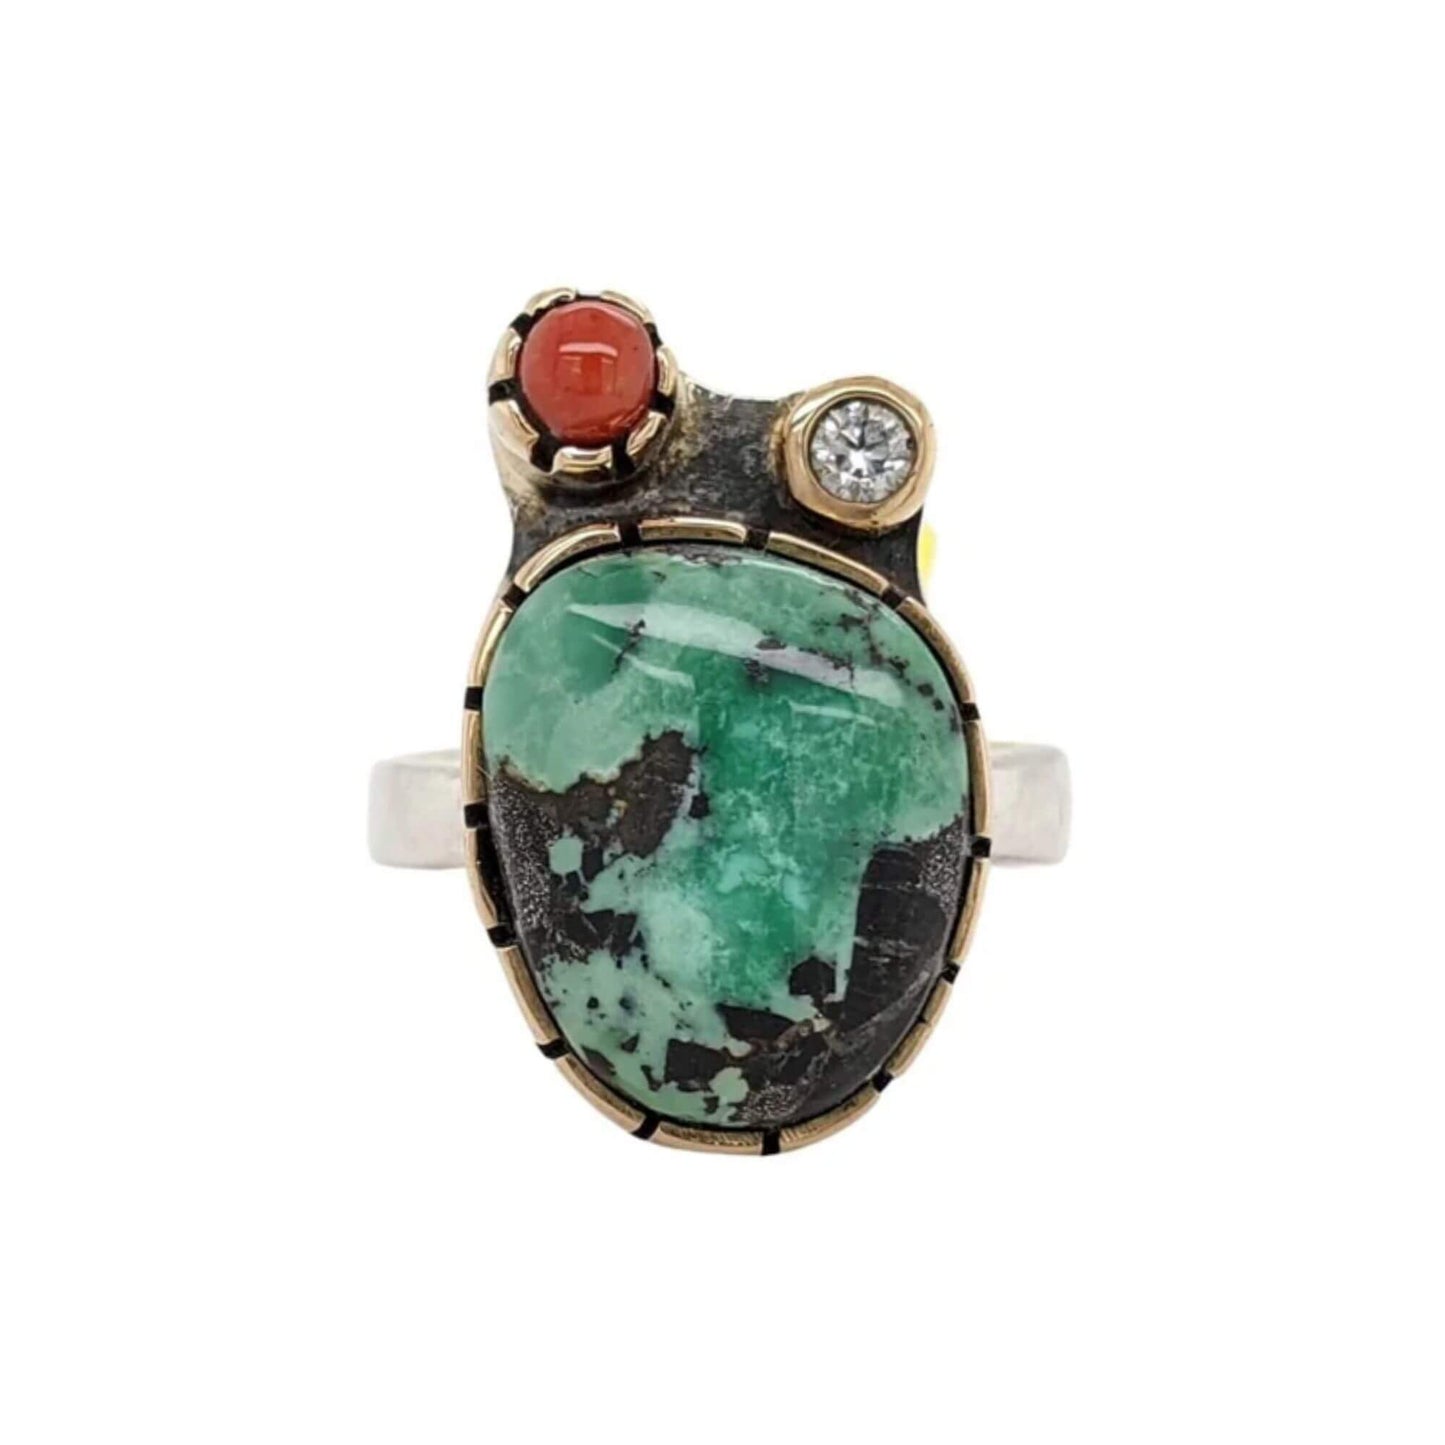 Statement ring featuring a cabochon variscite gemstone in shades of green with a diamond and Mediterranean red stone accent.